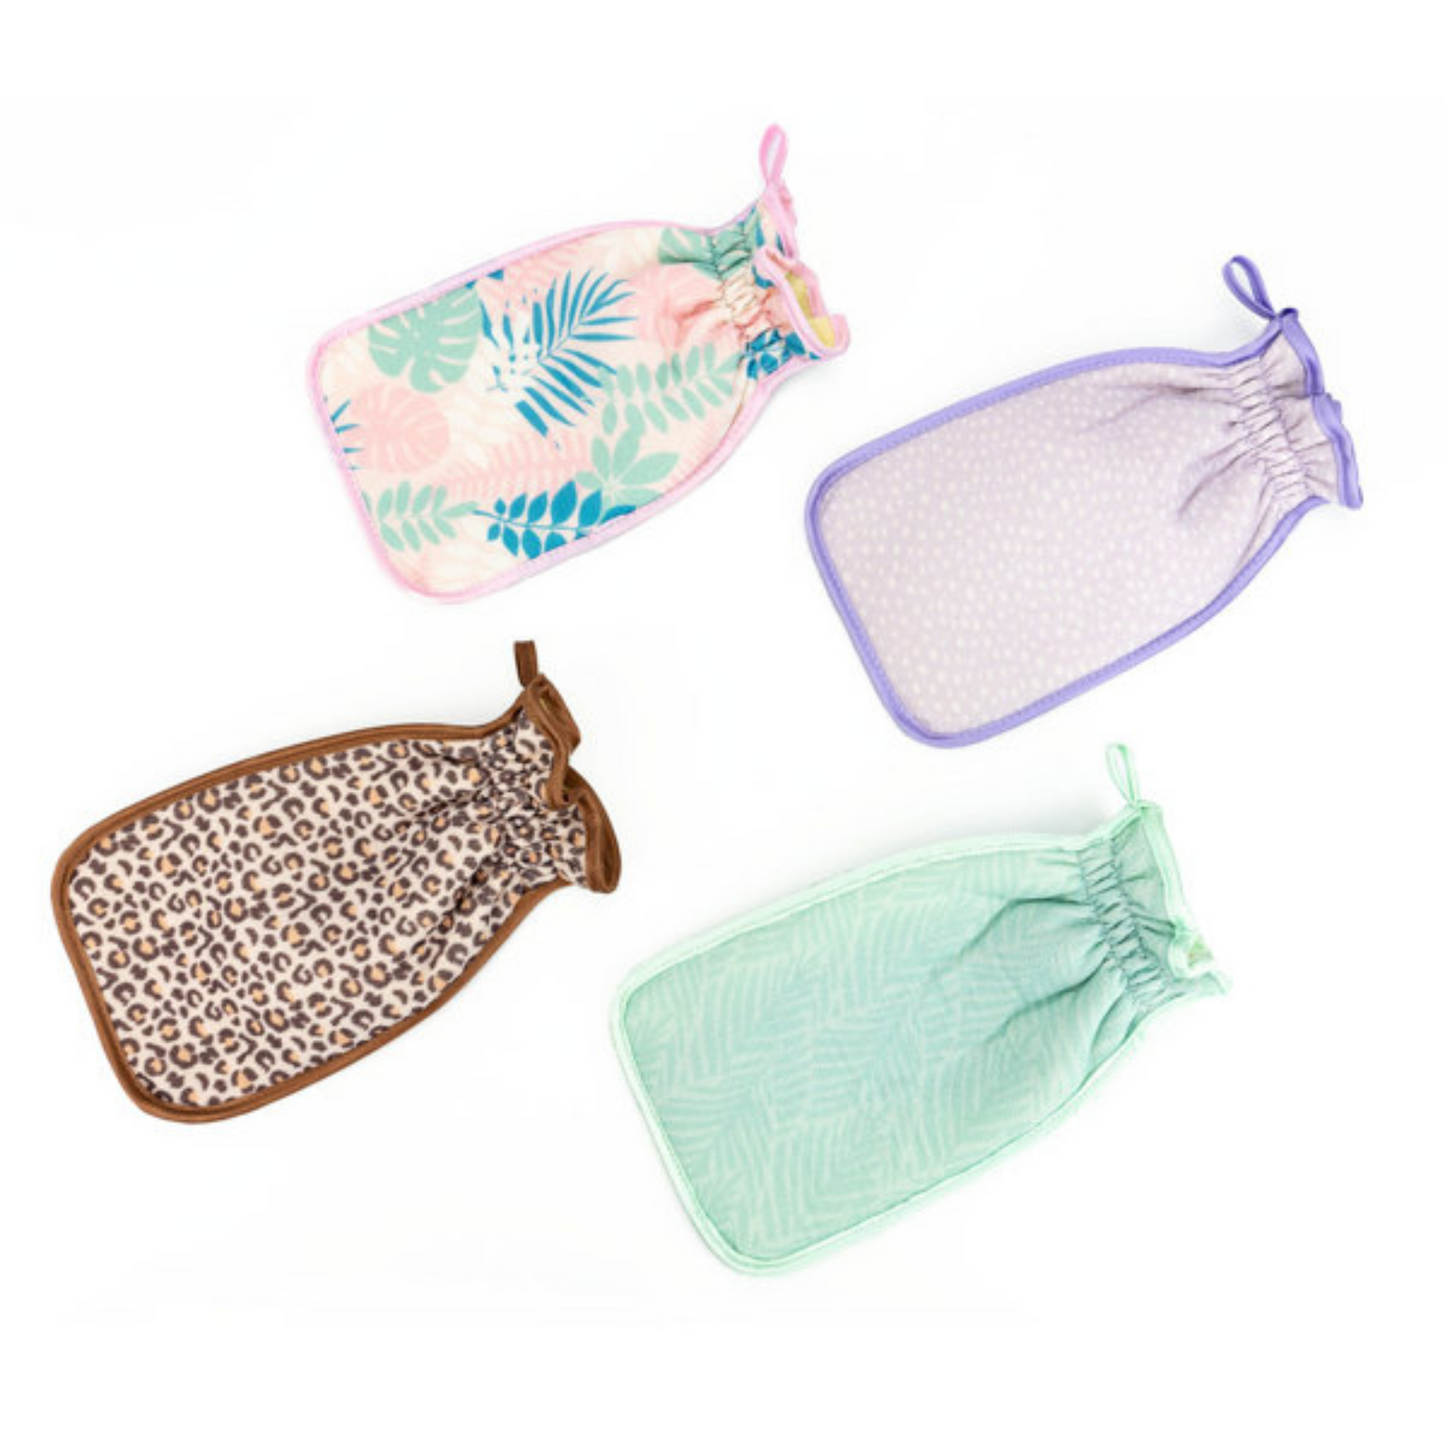 exfoliating mitt from Lemon Lavender. Comes in pink, purple, teal, and animal print designs